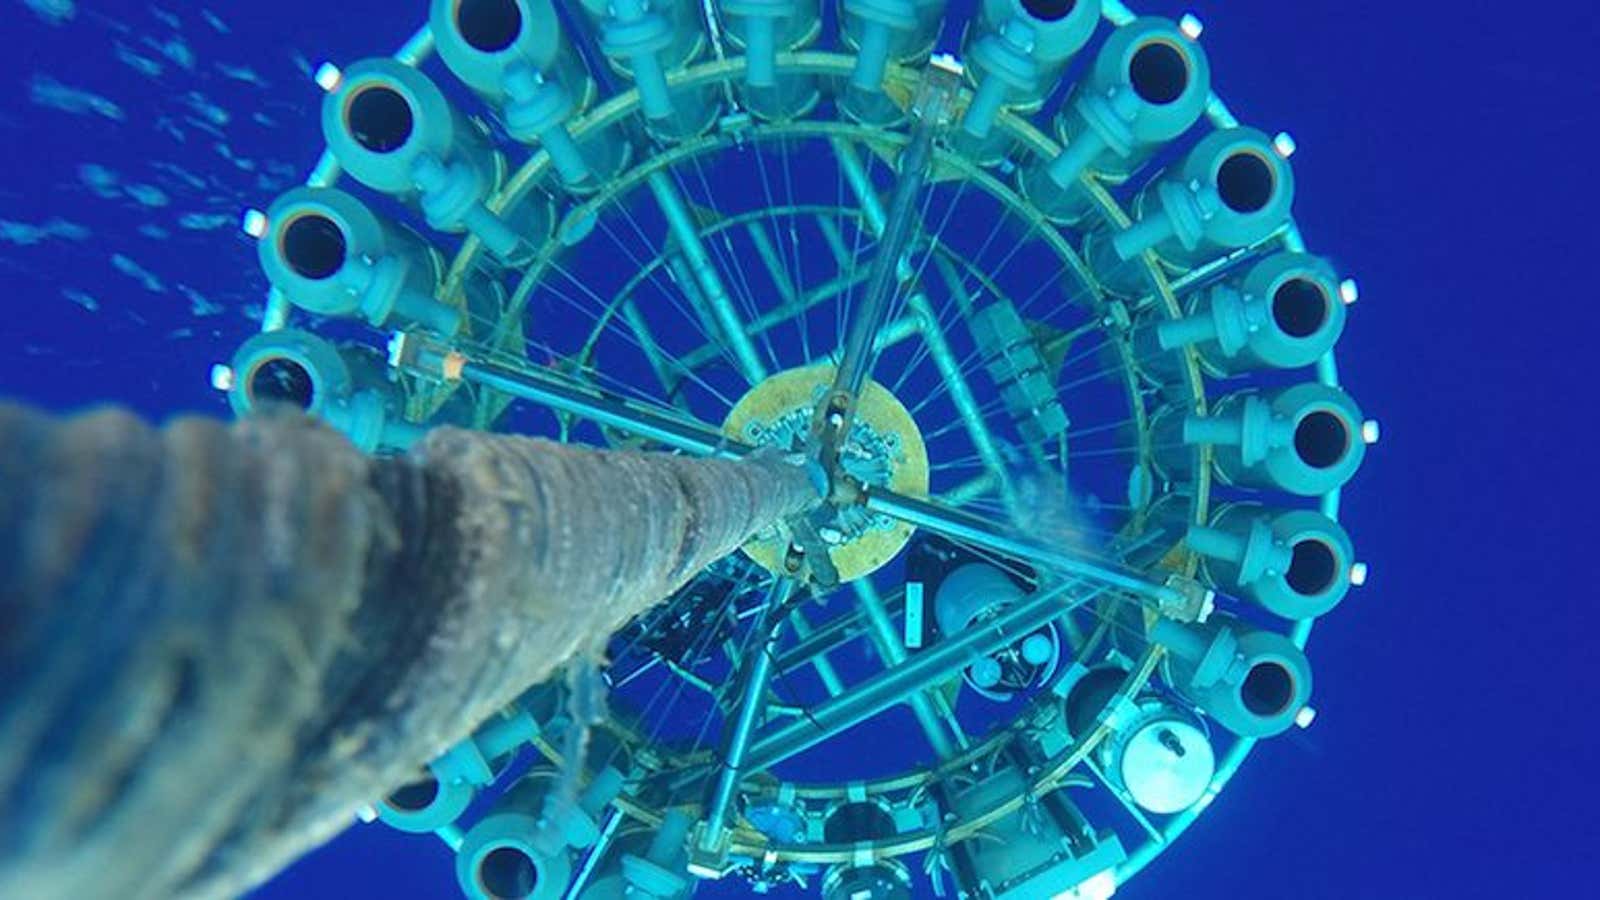 deep sea sensors tested by the Ocean Health XPrize